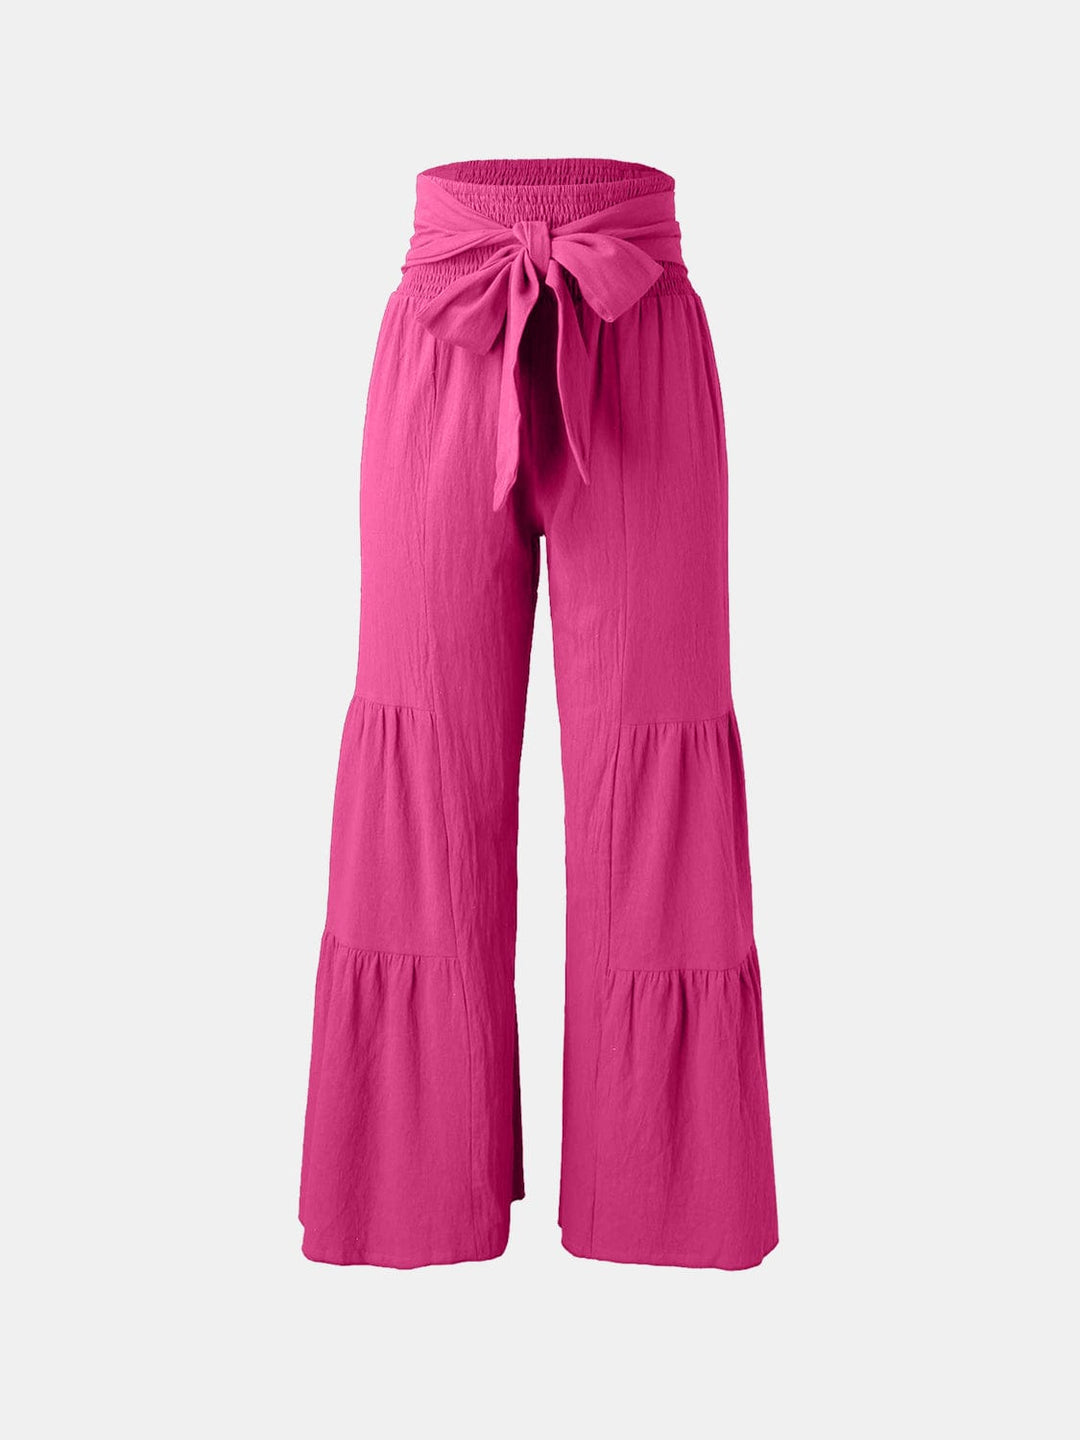 The802Gypsy Bottoms/Pants & Culotte Deep Rose / S GYPSY-Tied Ruched Wide Leg Pants